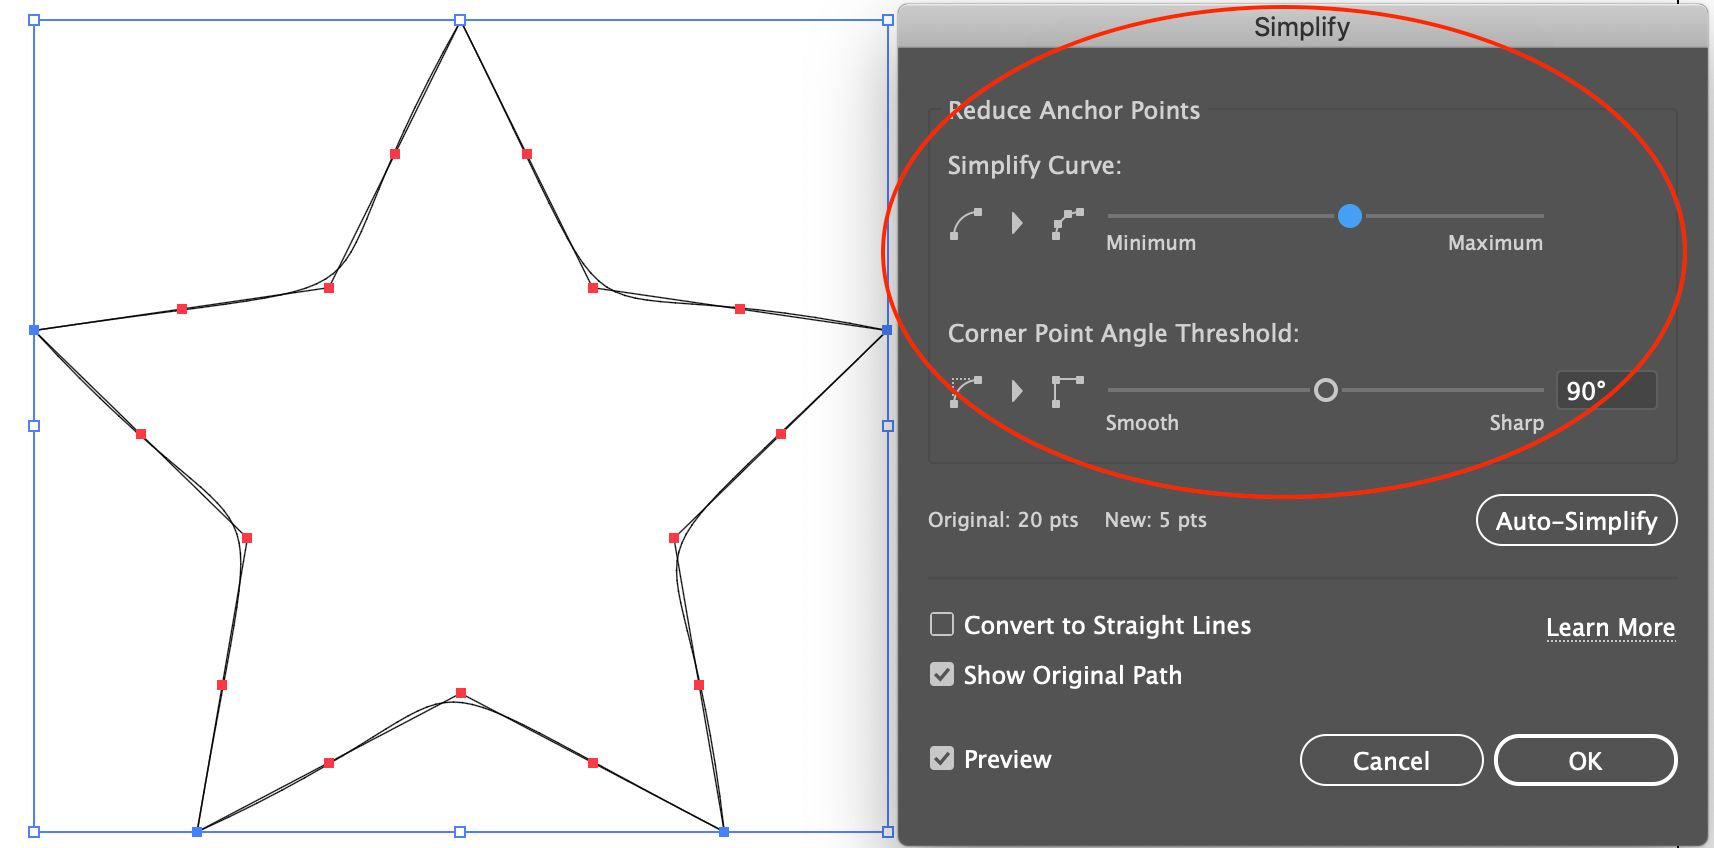 Screenshot of the expanded path simplify options in Illustrator